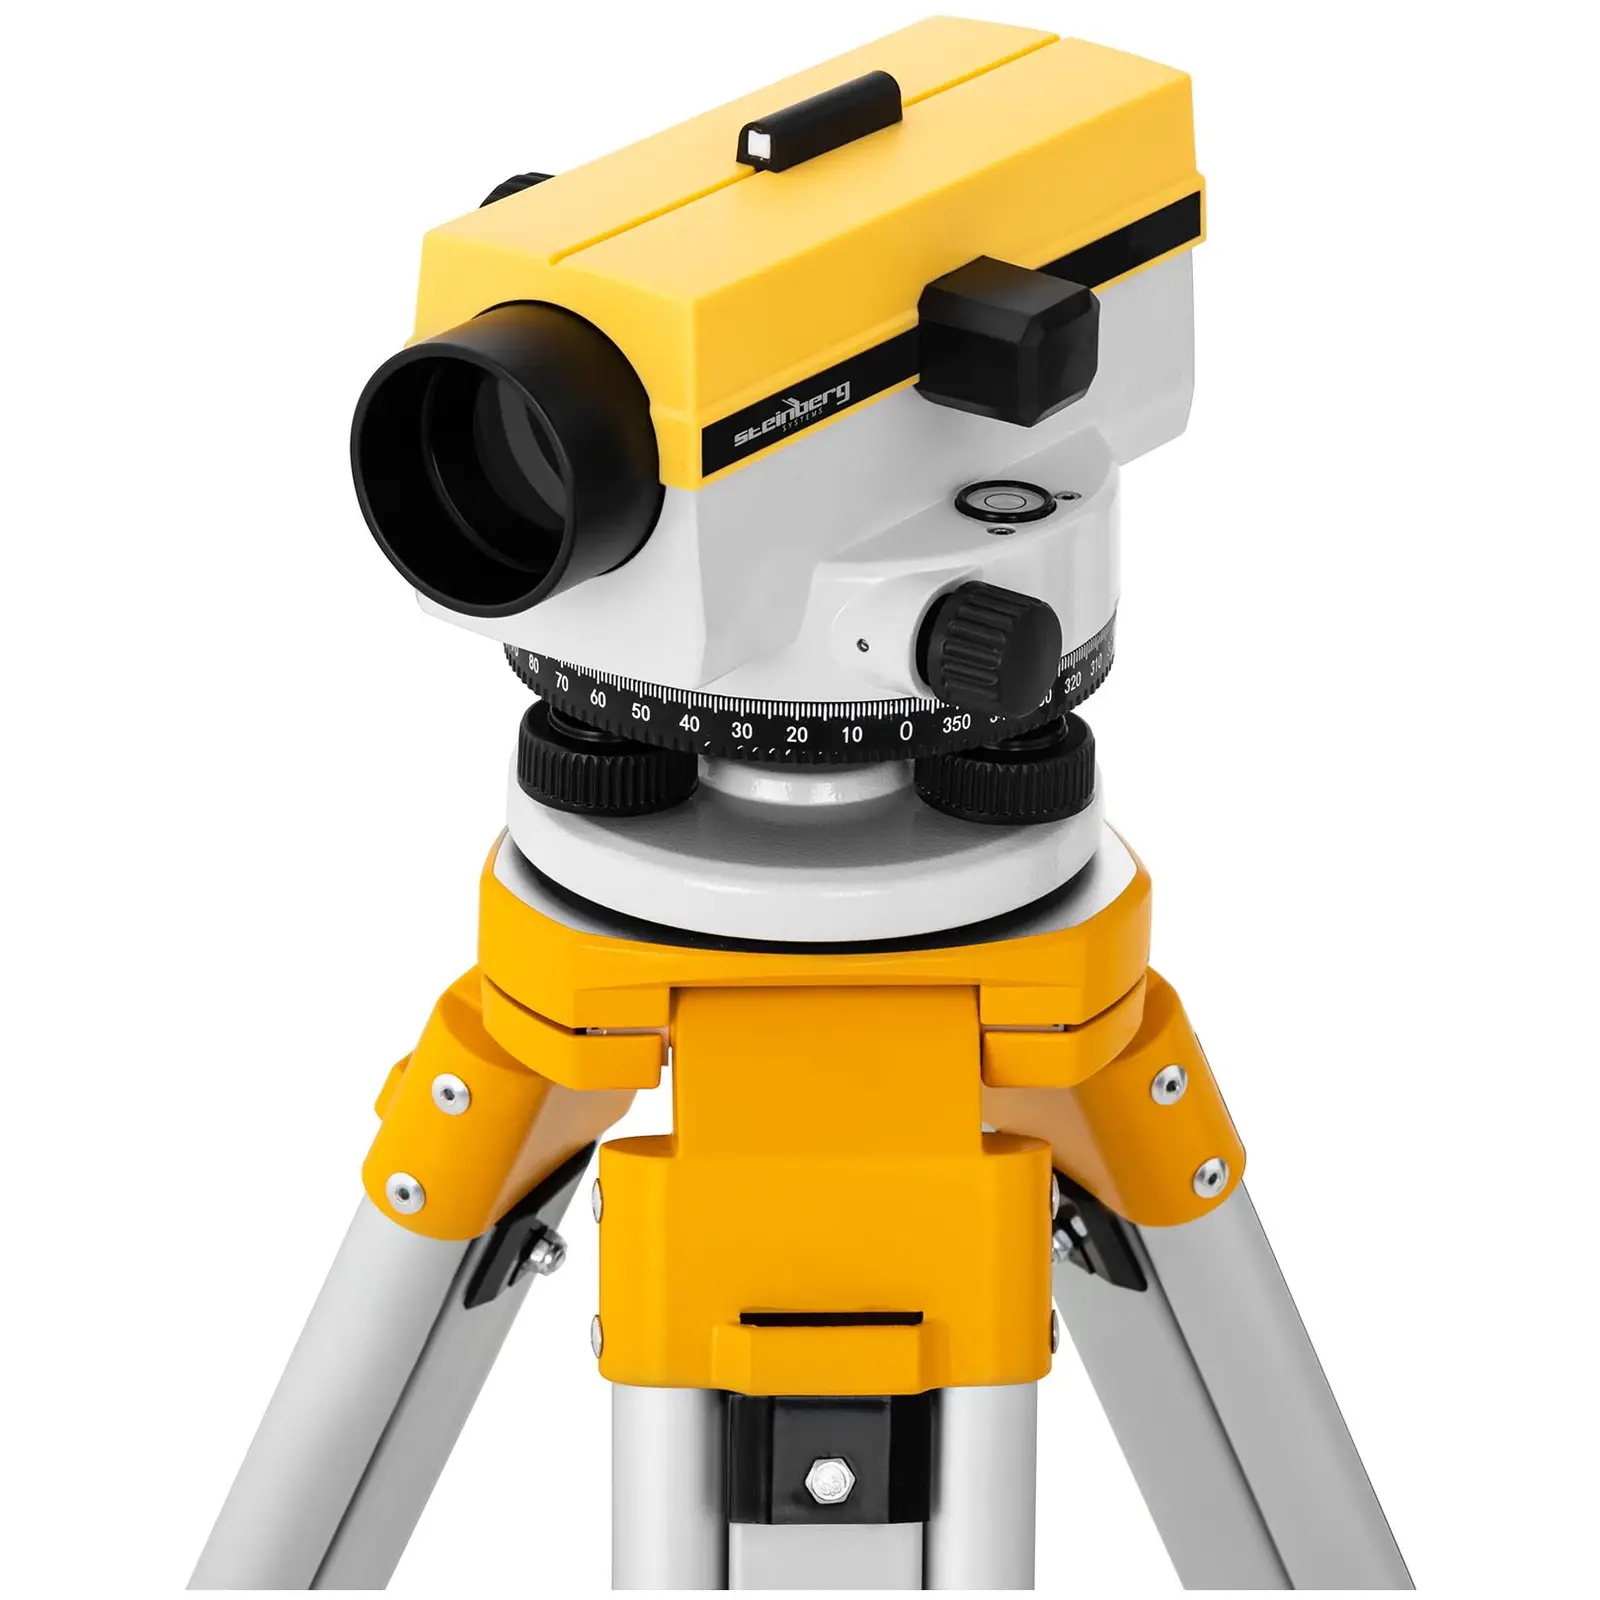 Automatic Level - with tripod and level staff - 32x magnification - 40 mm lens - deviation 1 mm - air damped compensator